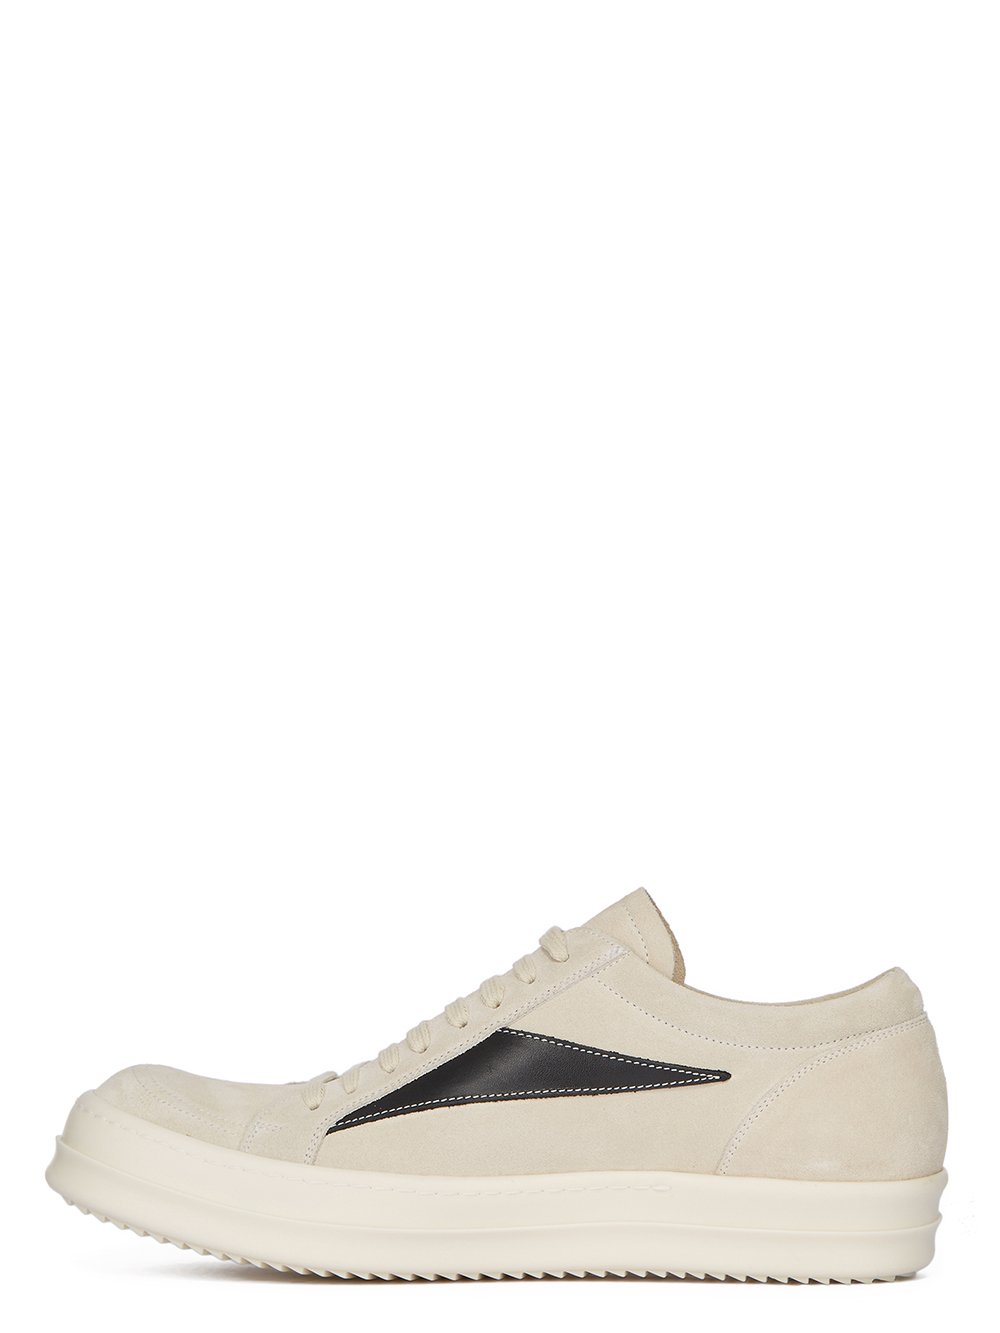 RICK OWENS FW23 LUXOR VINTAGE SNEAKS IN VELOUR SUEDE AND FULL GRAIN CALF LEATHER